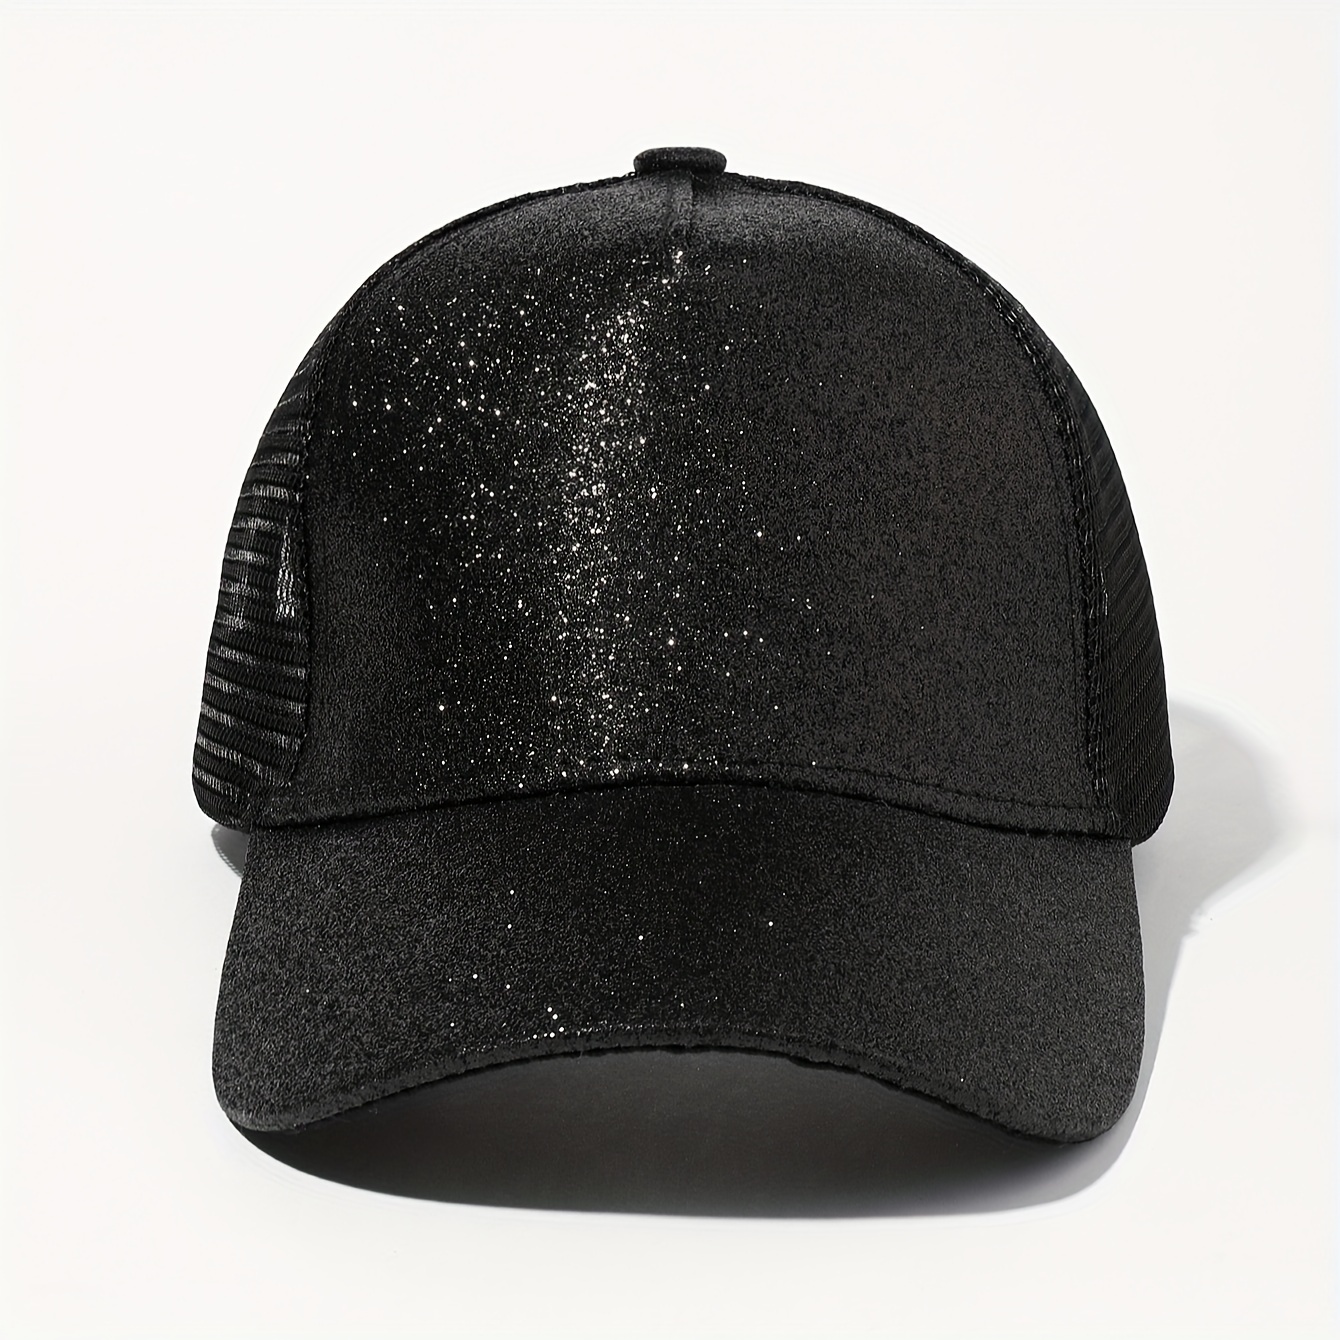 

Women's Glittery Baseball Cap With Mesh Back, Simple Shiny Sun Protection Trucker Hat For Outdoor And Street Party, Adjustable Fit - 1 Size Music Festival